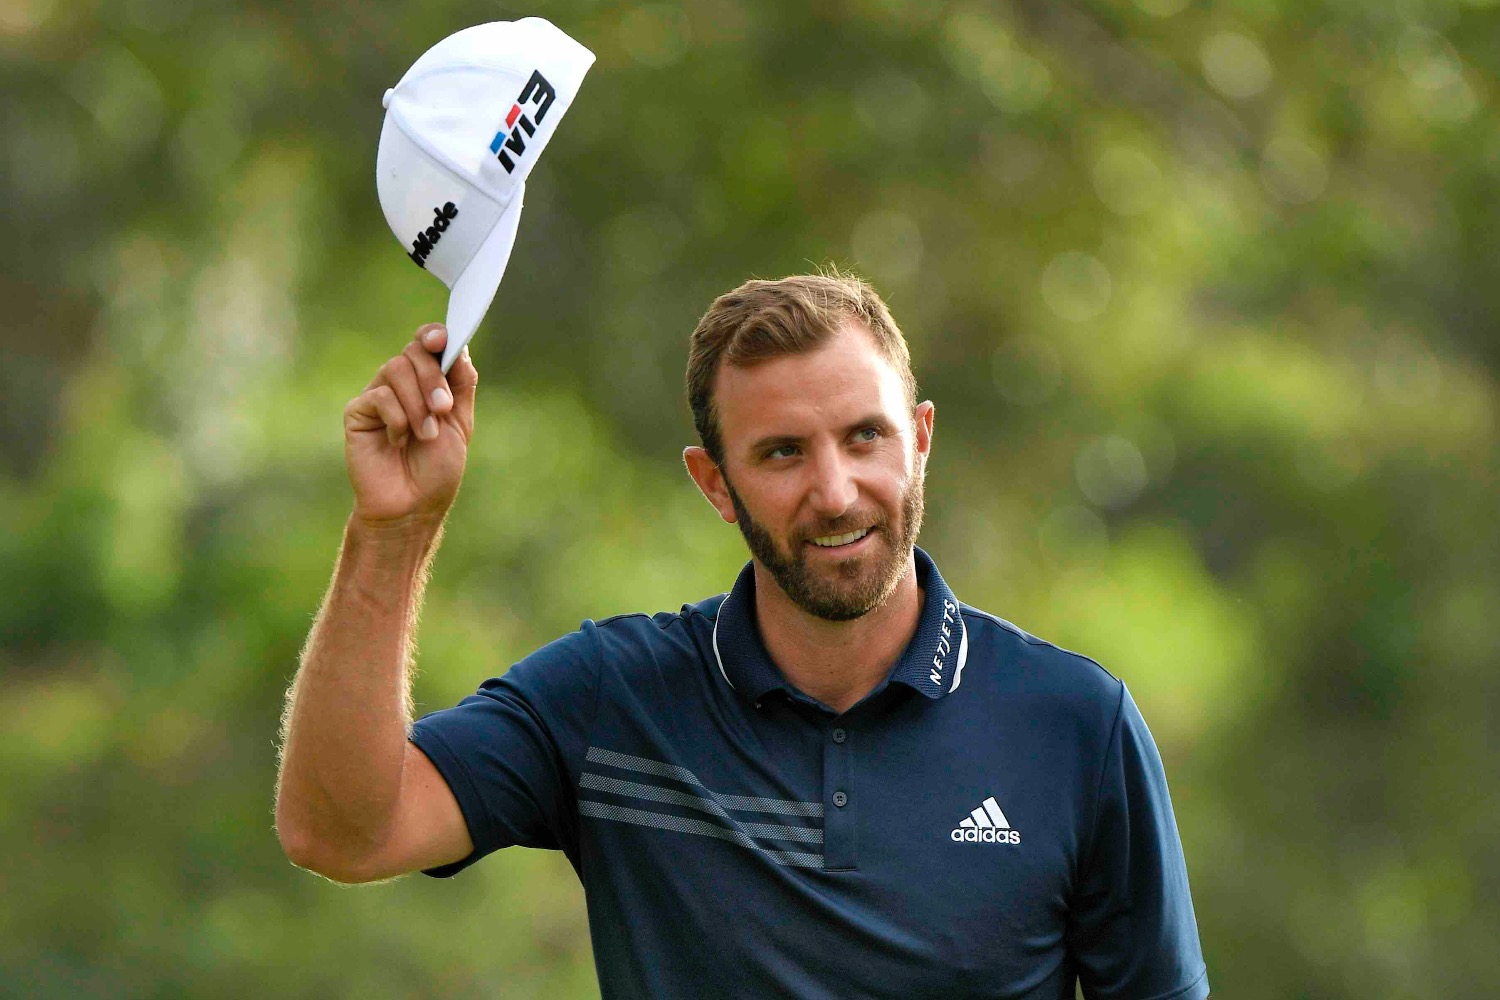 Betting tips and stats for the Players Championship | Irish Golfer News ...